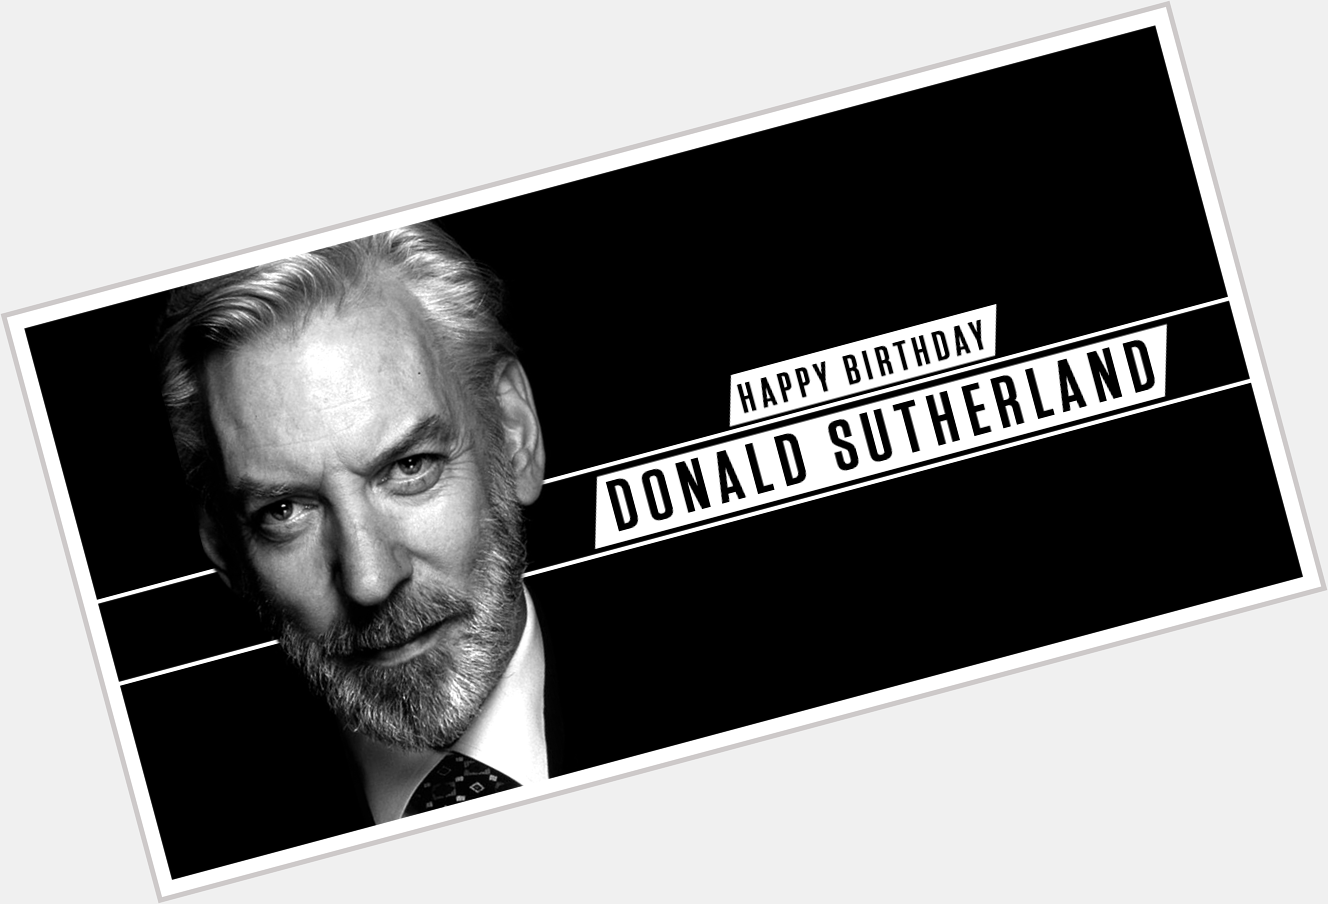 Happy Birthday to the regal Donald Sutherland! 